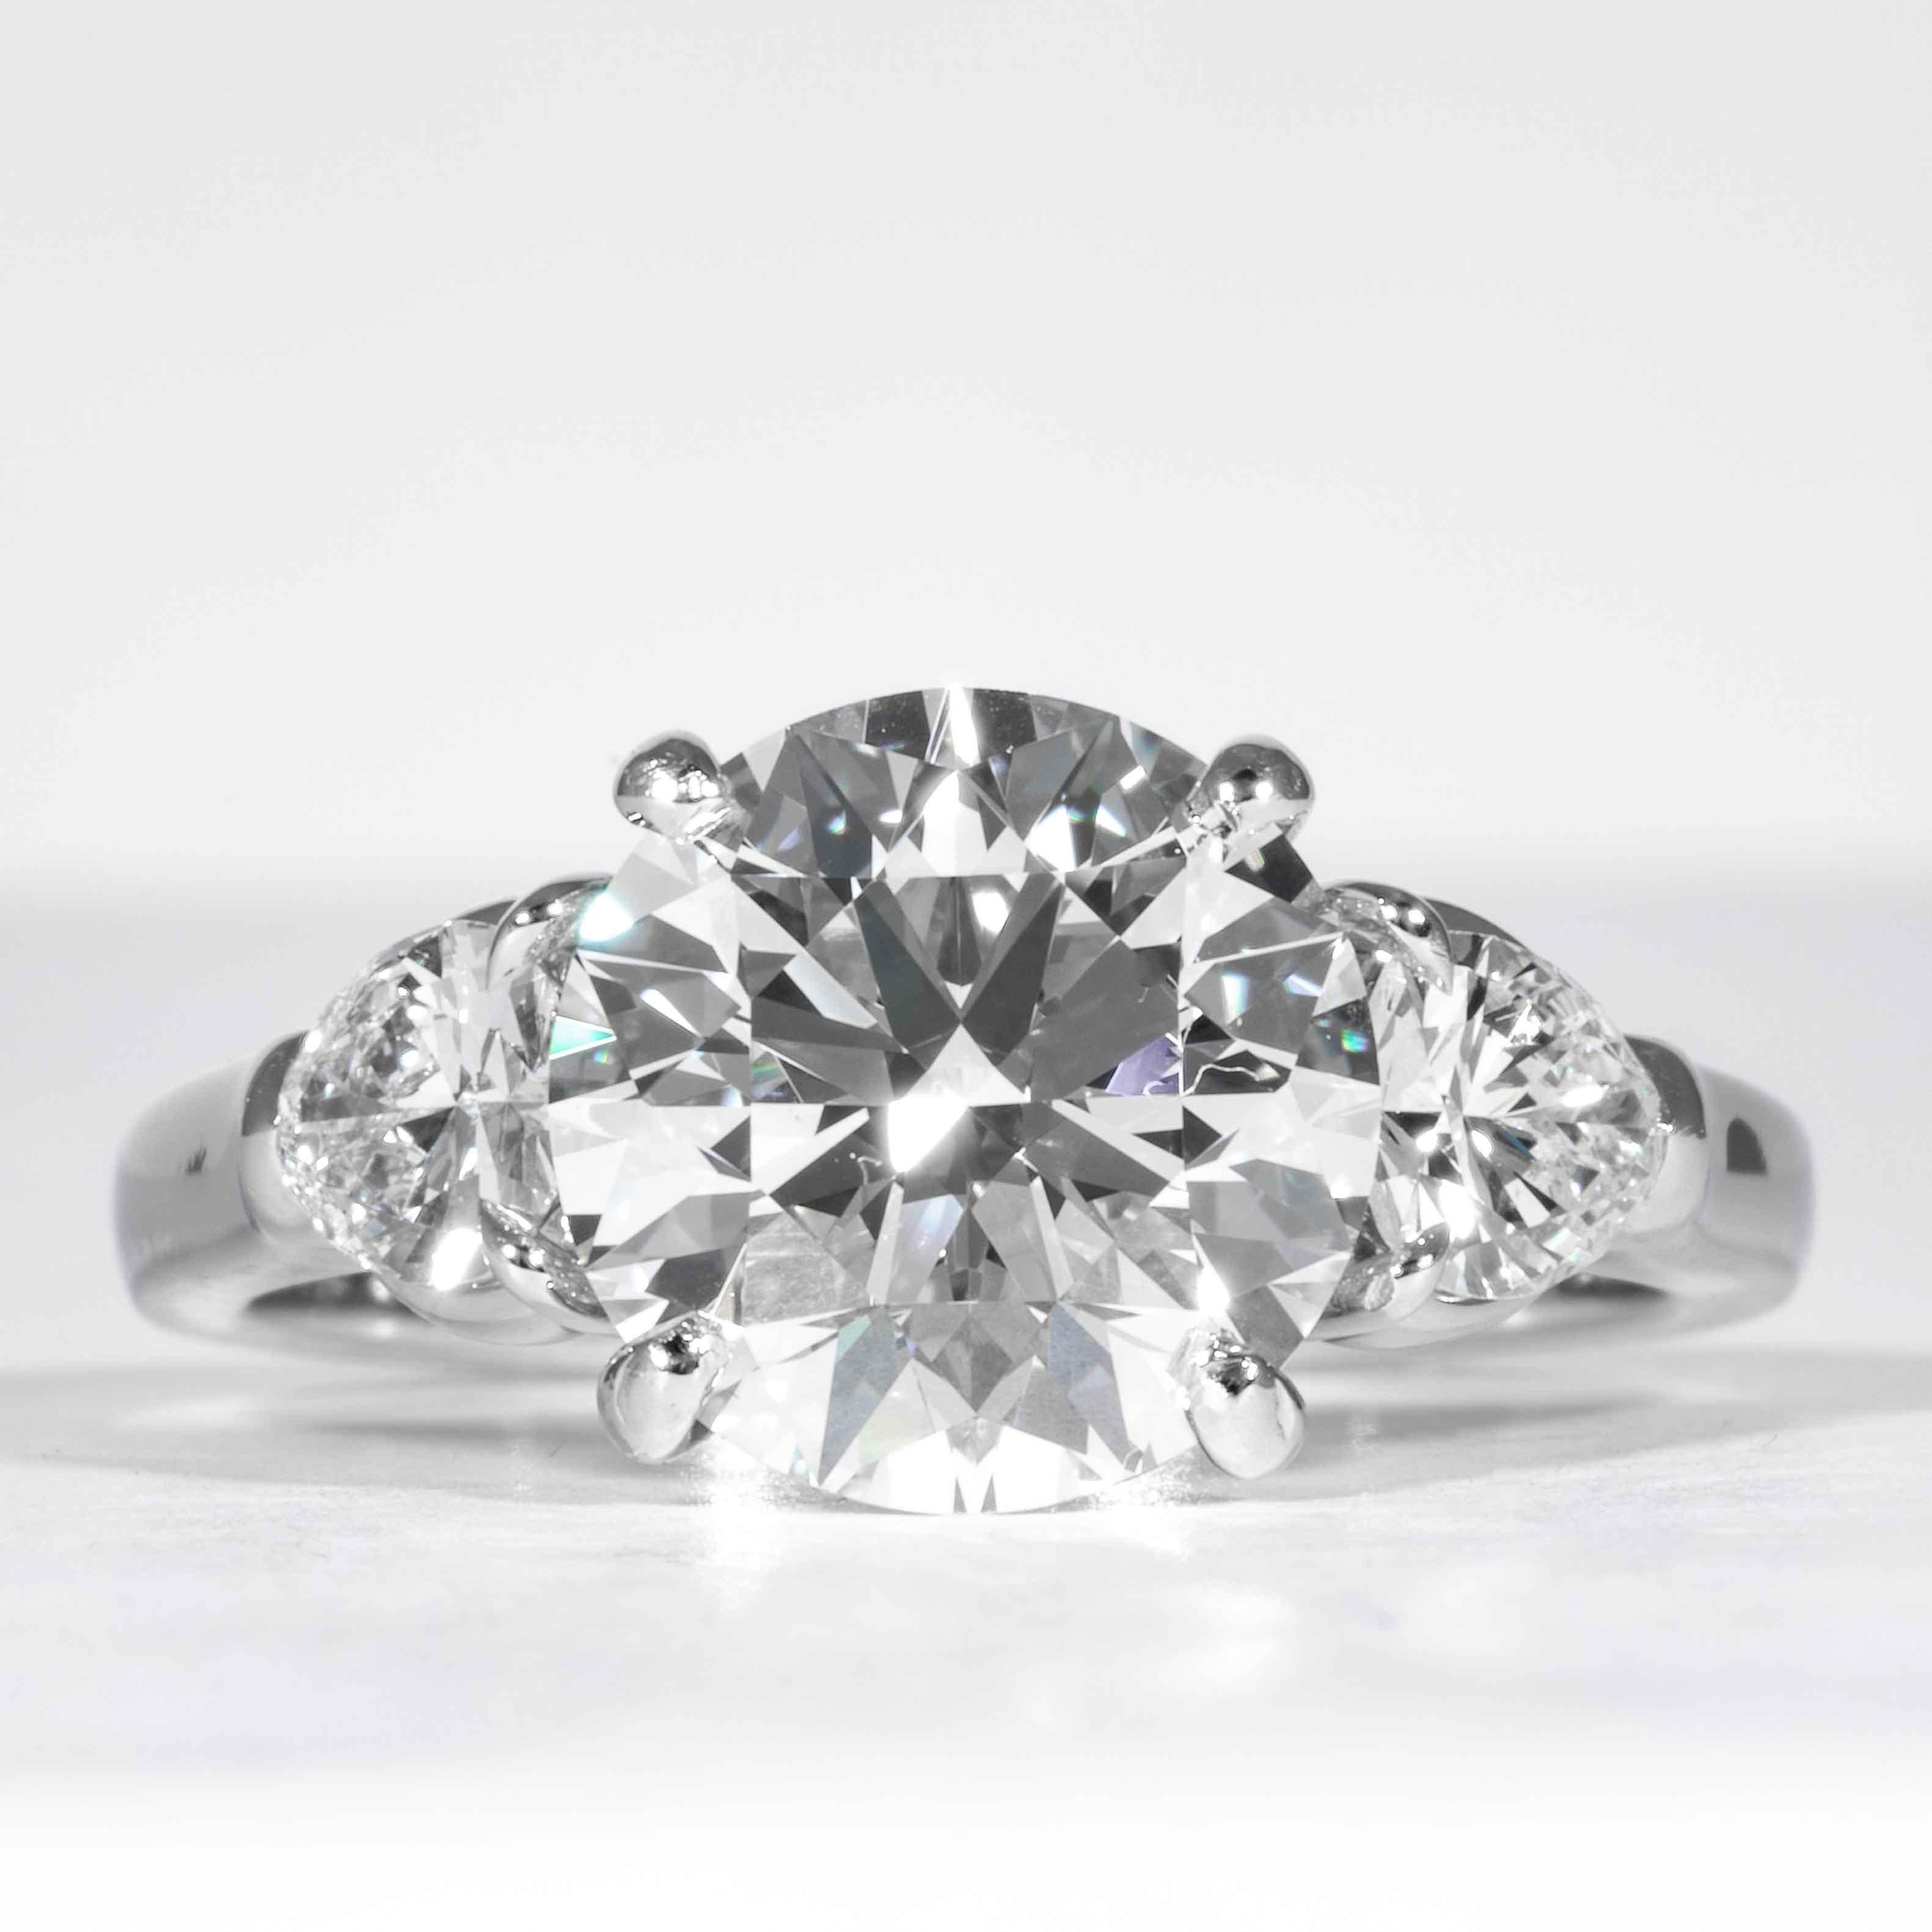 This elegant and classic diamond ring is offered by Shreve, Crump & Low. This 3.23 carat GIA Certified E VVS2 round brillinat cut diamond measuring 9.42 - 9.46 x 5.88 mm is custom set in a handcrafted Shreve, Crump & Low platinum 3-stone ring. The